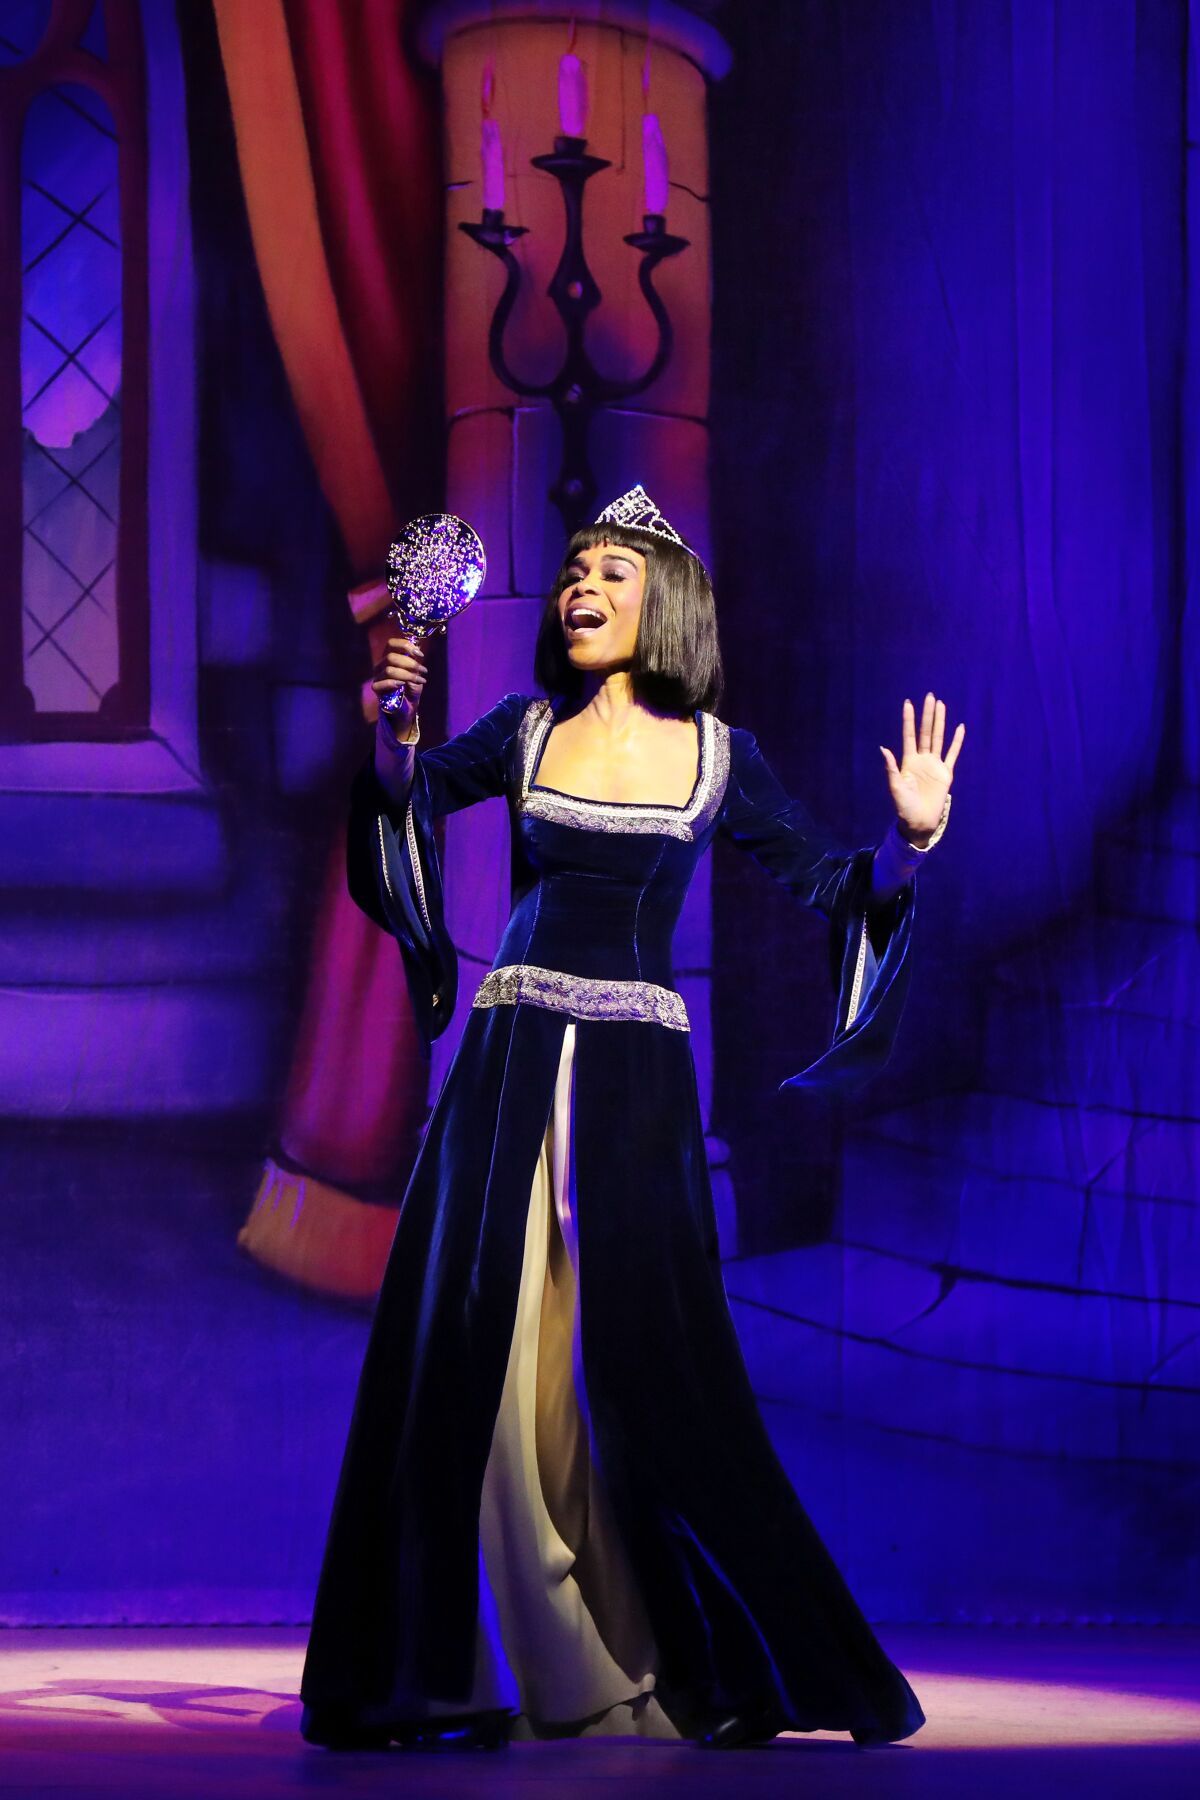 Michelle Williams in "A Snow White Christmas"